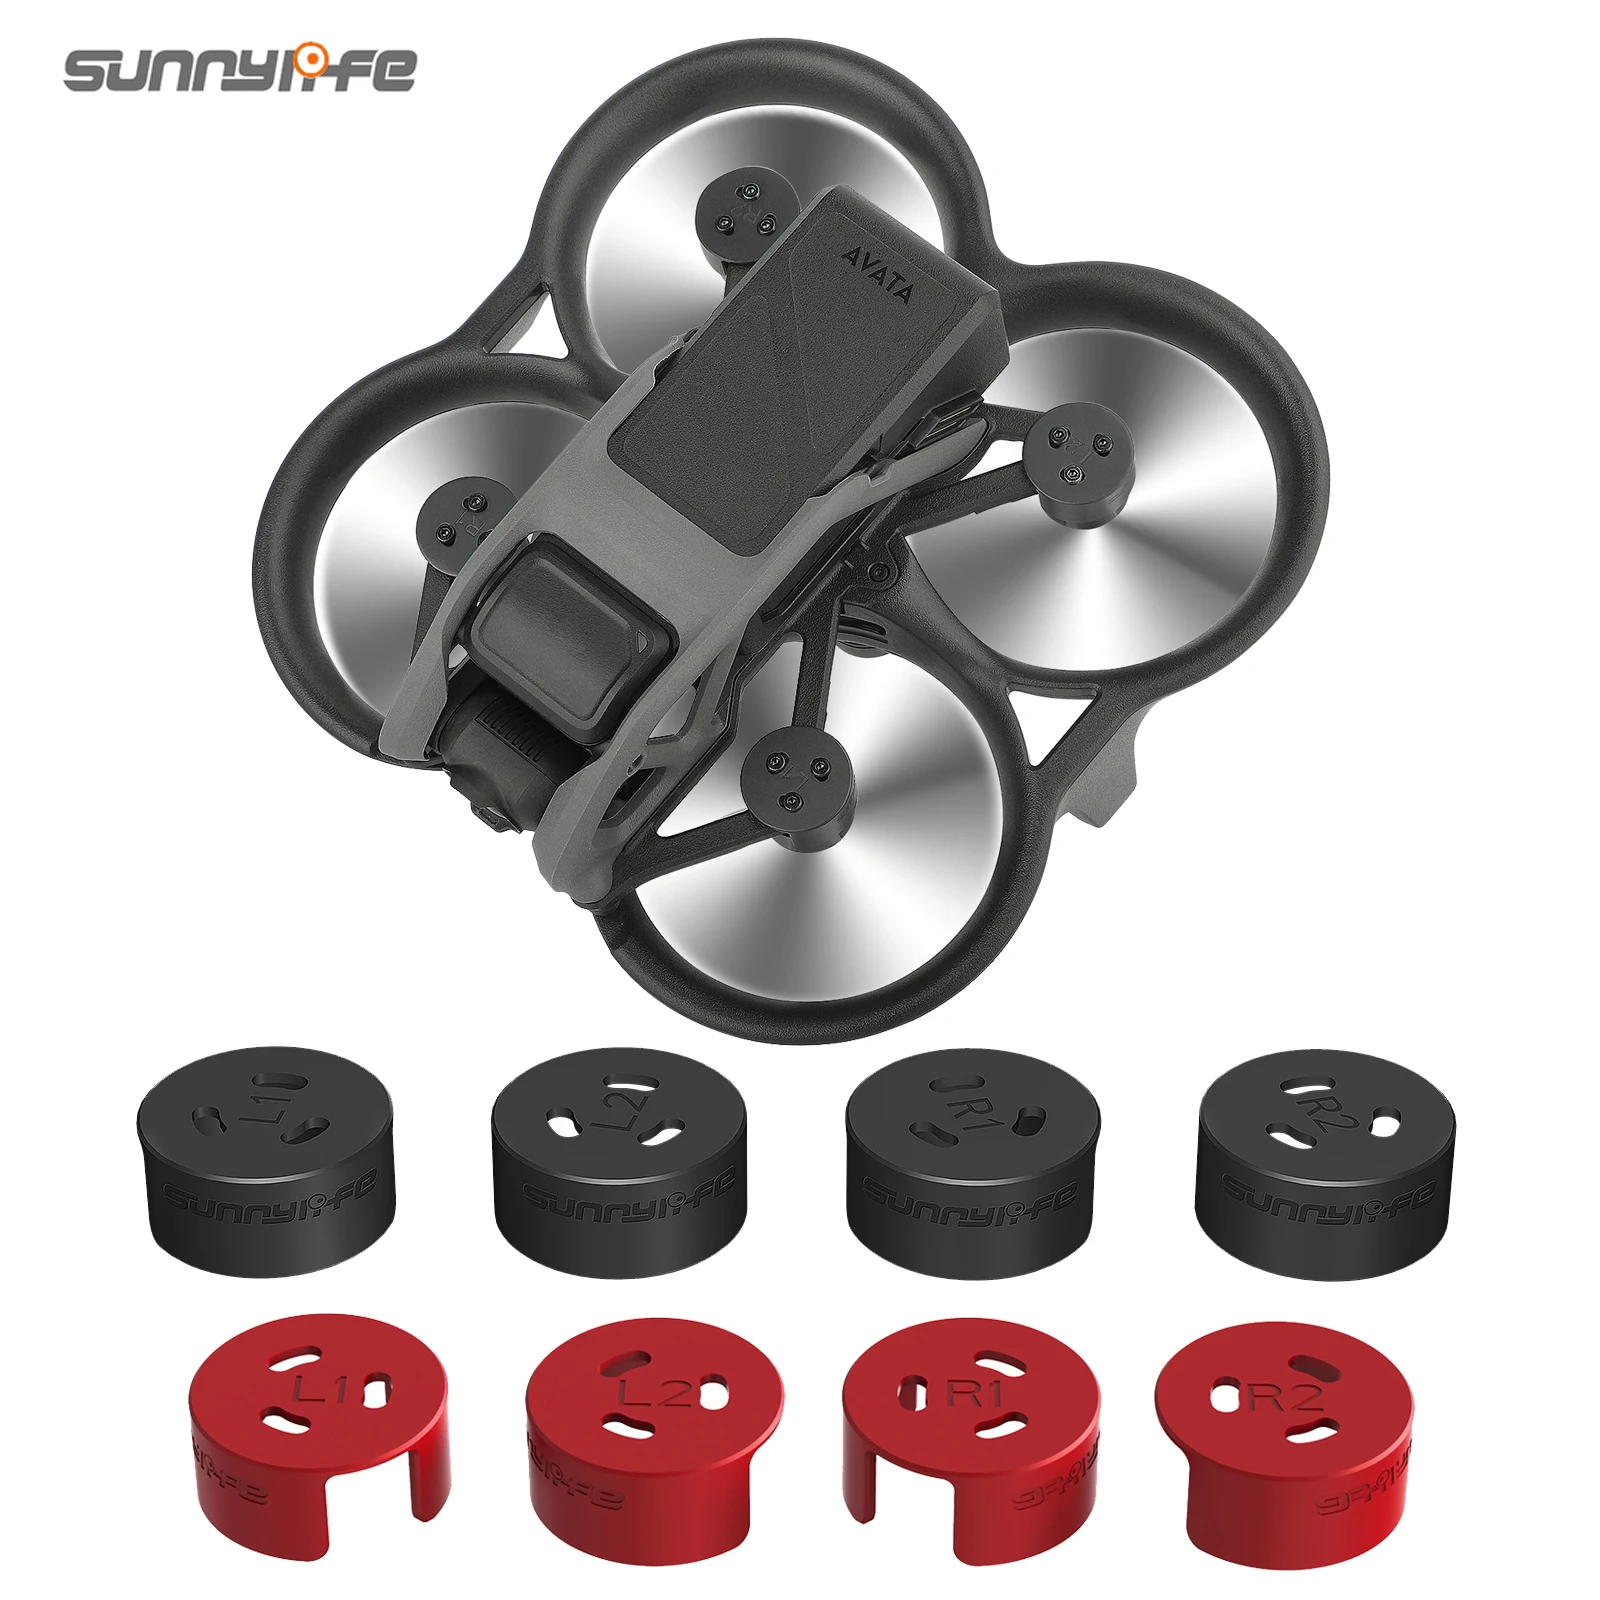 

Aluminium Motor Cover Cap Hood for DJI Avata Drone Accessories Cover Against Paddles Dust-Proof Engine Protector